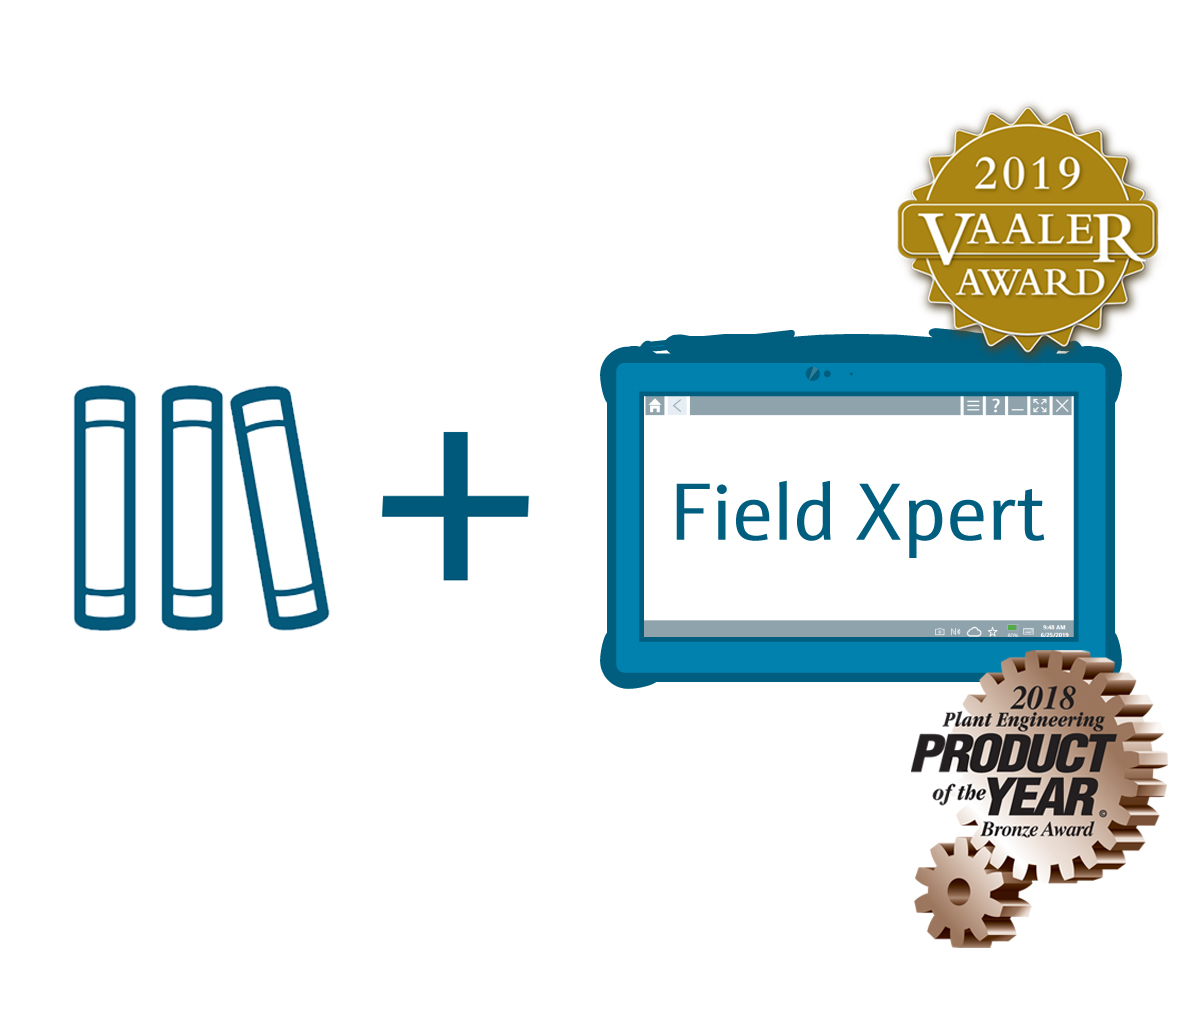 Smart device configuration with Netilion Library and Field Xpert: Mike and Ryan love it